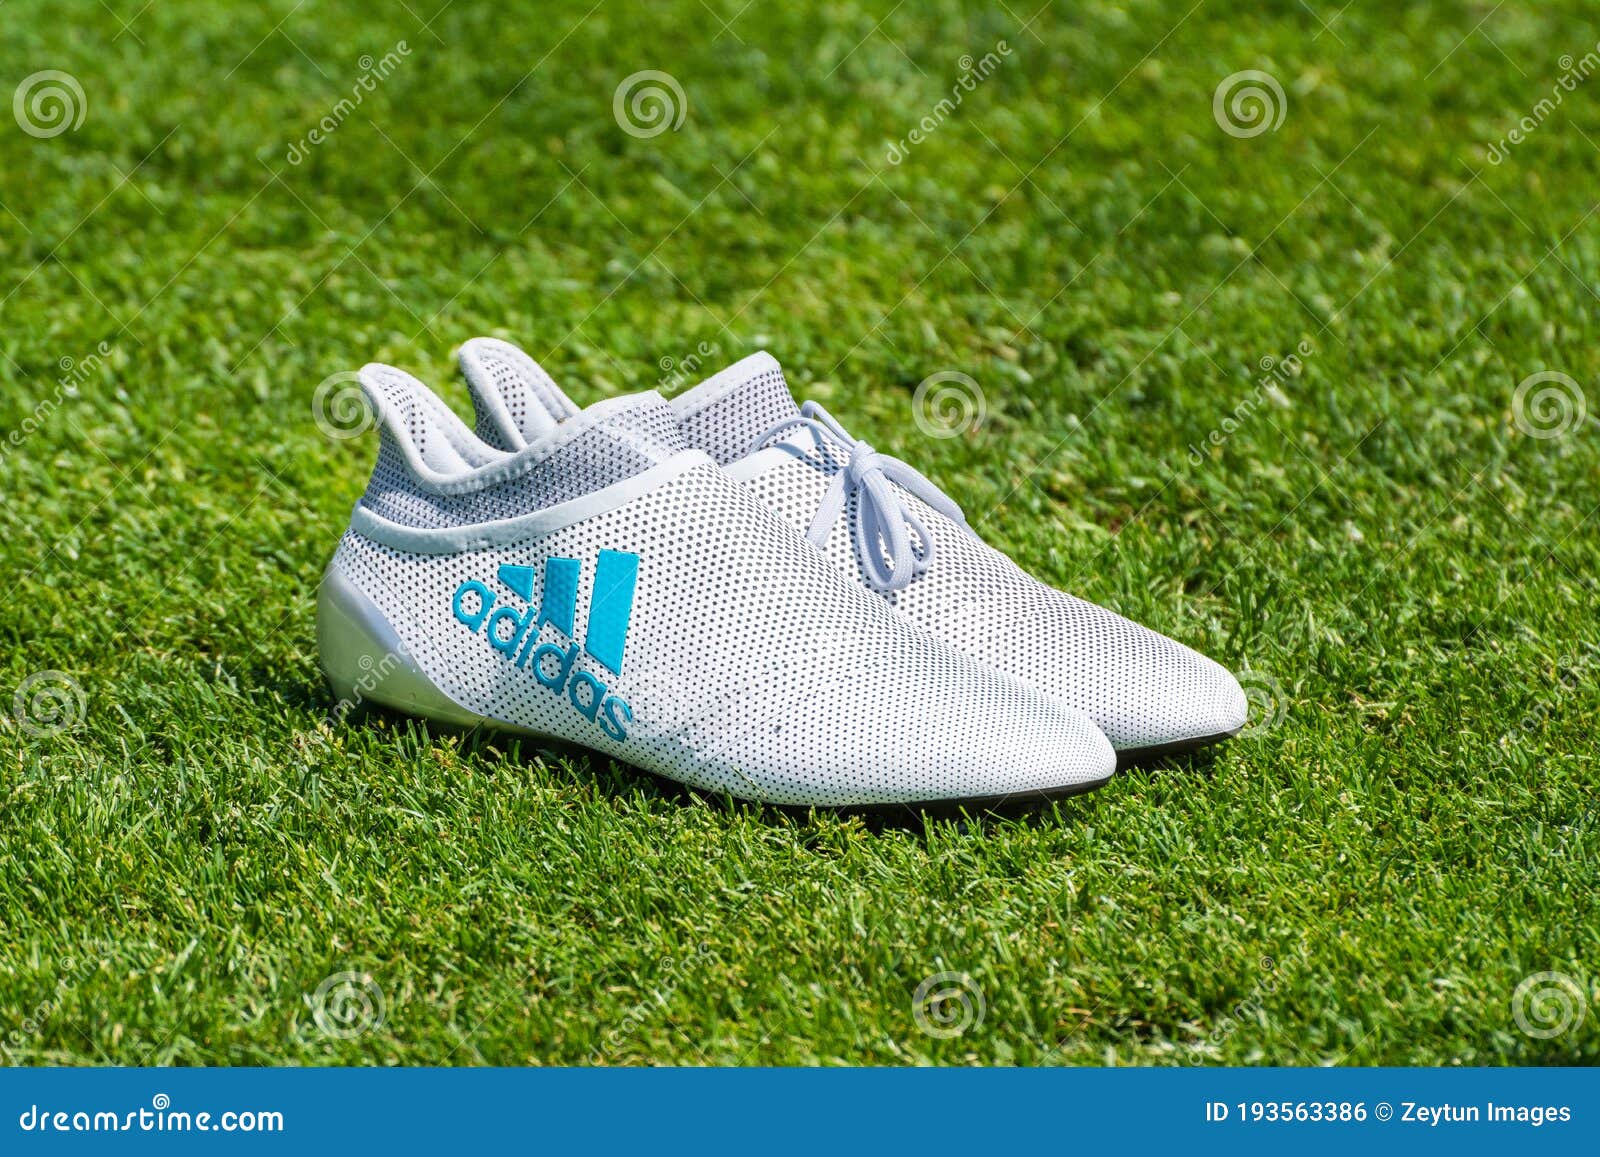 163 Adidas Football Boots Stock - Free & Royalty-Free Stock from Dreamstime